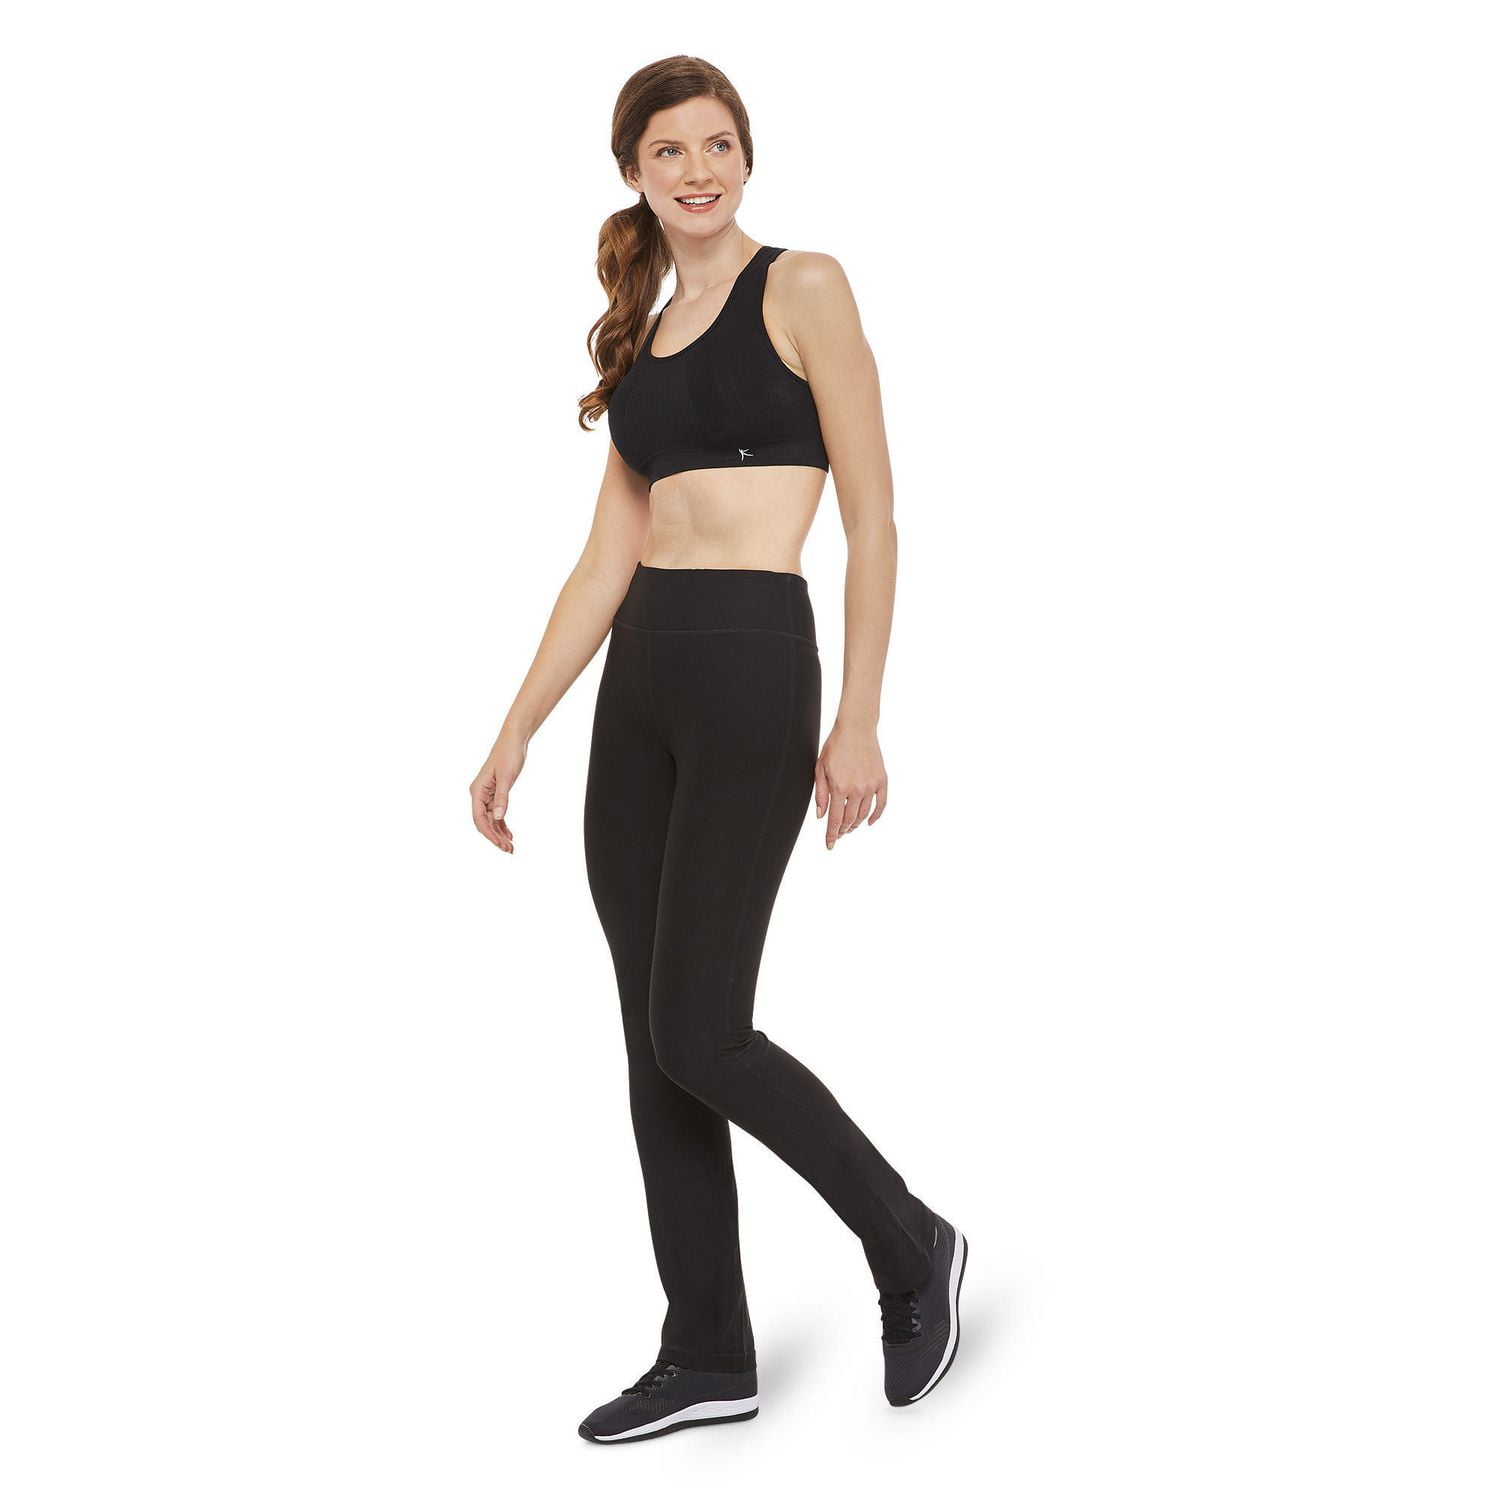 Walmart is selling $16 yoga pants that are the perfect dupe for